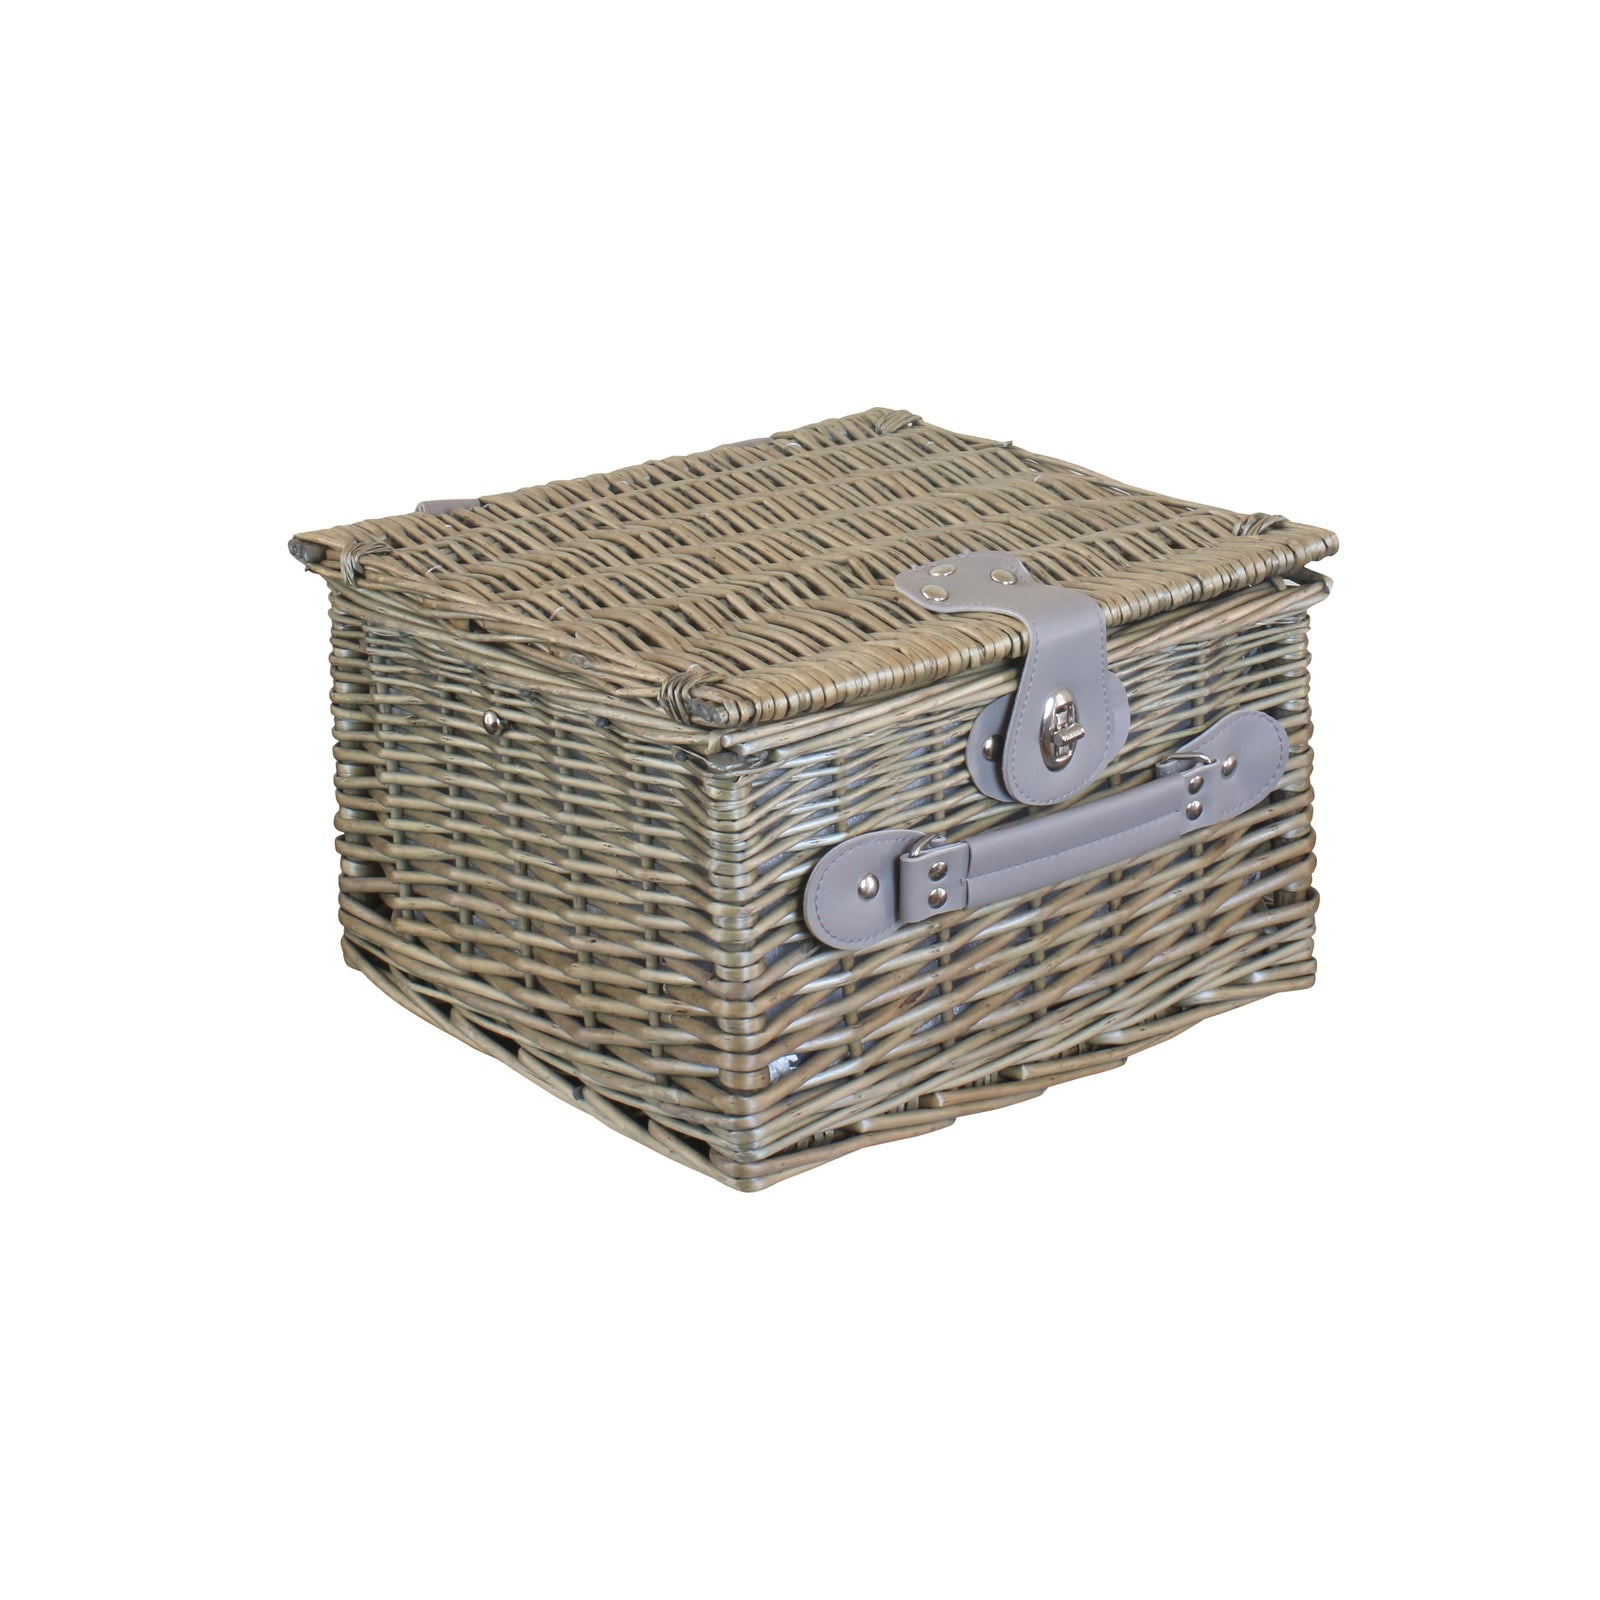 Red Hamper Grey Checked Picnic Wicker Basket With Cooler